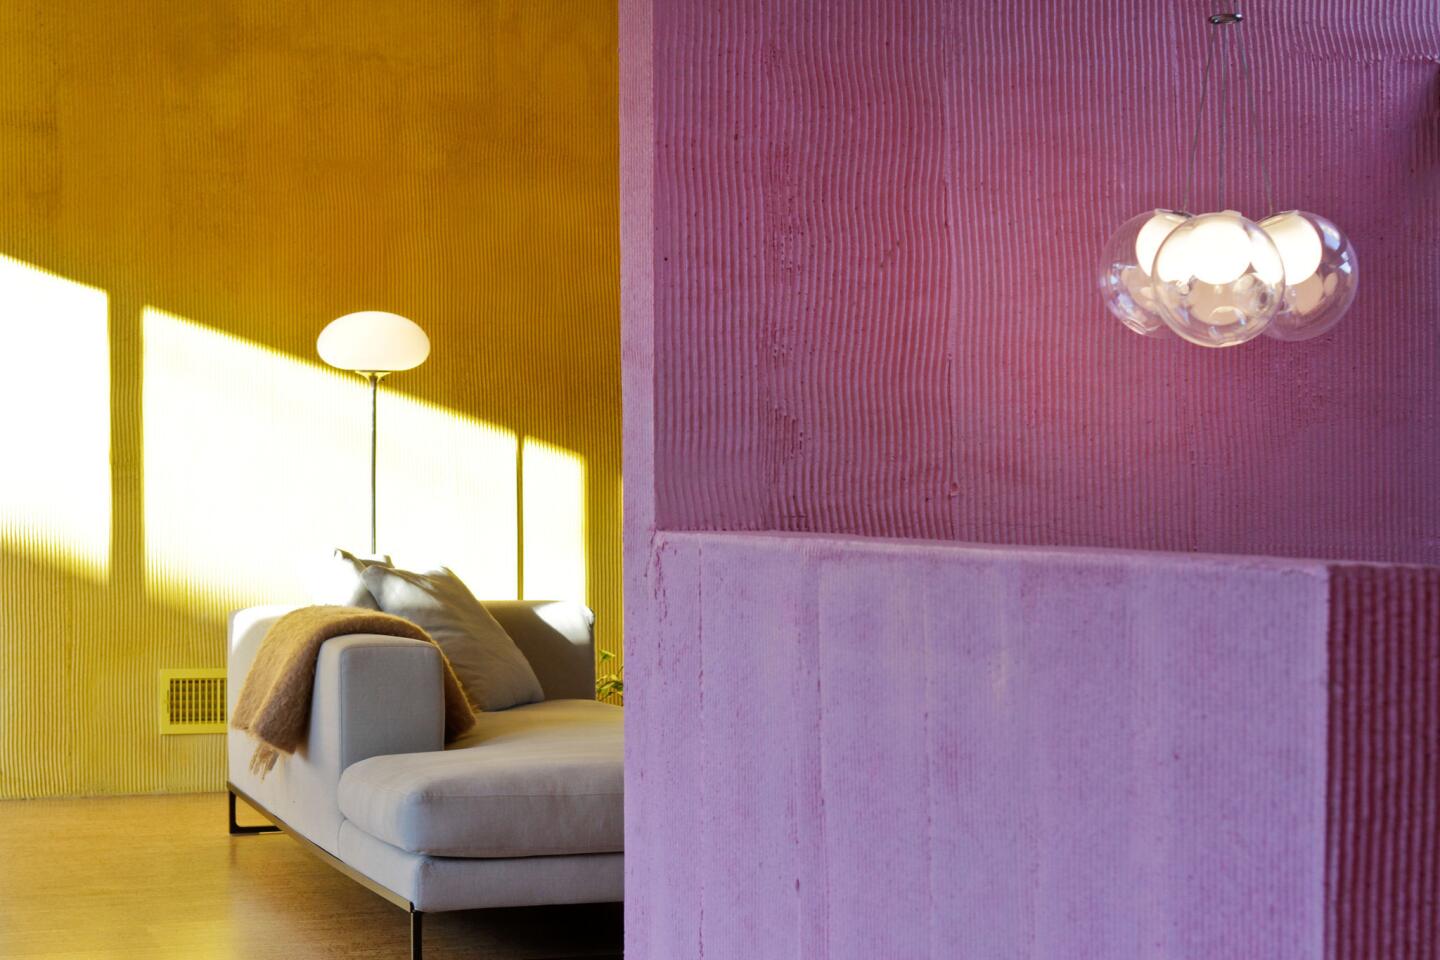 In Los Feliz, raked stucco walls glowing in saturated pink and saffron are a nod to Mexican Modernist architect Luis Barragan.